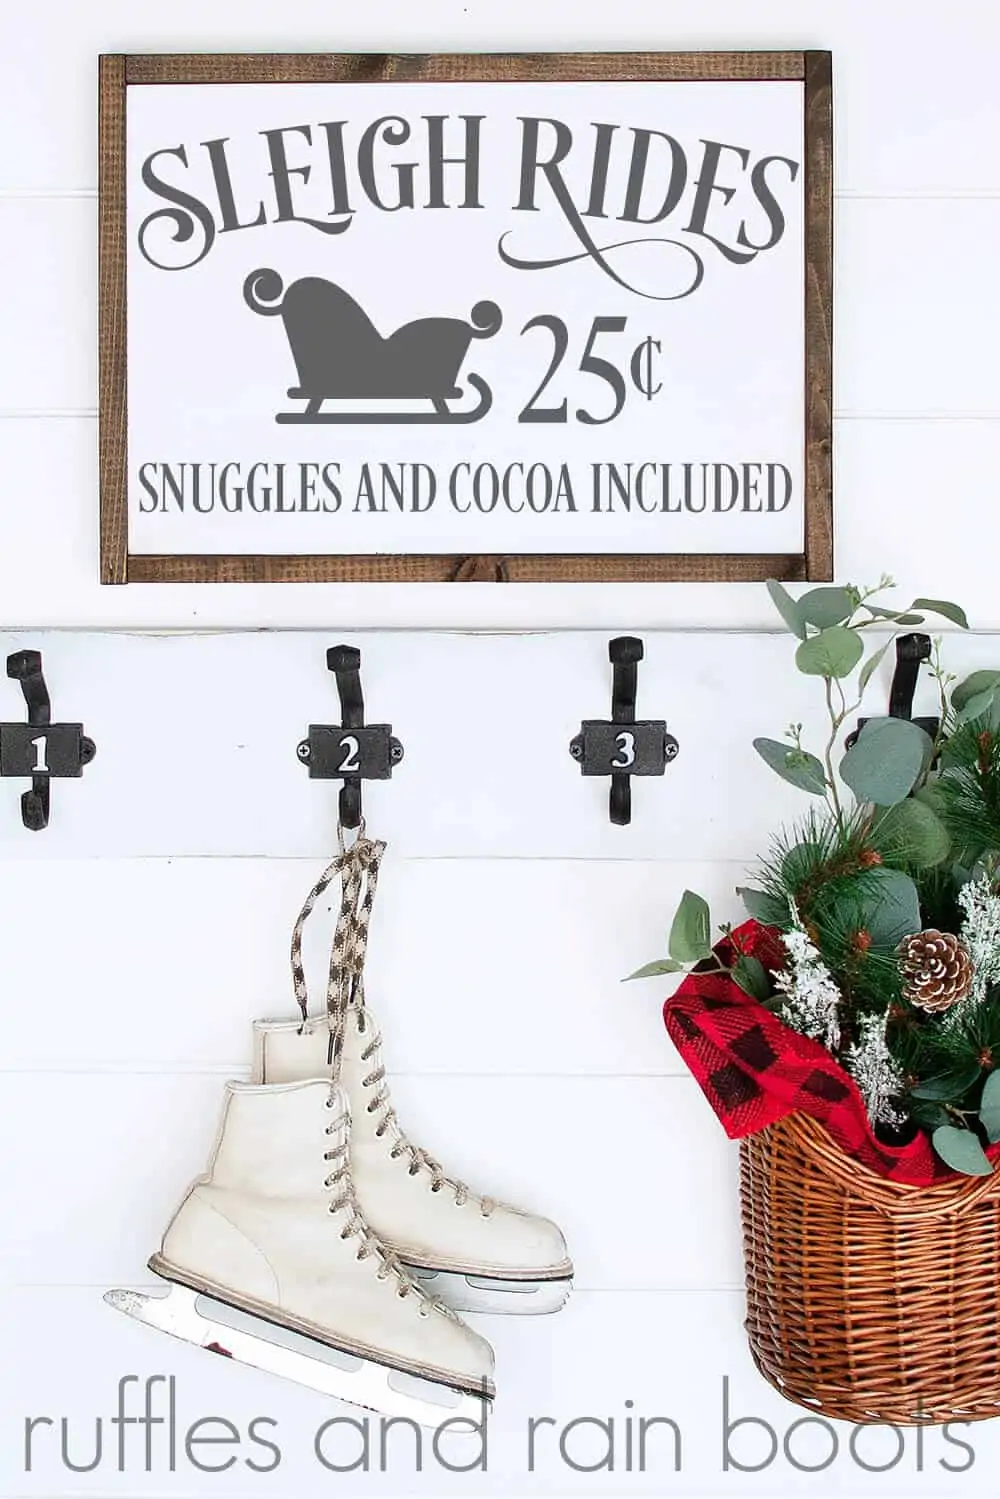 vertical image of sign with sleigh rides cut file illustration in gray with ice skates and basket hanging on white wood wall